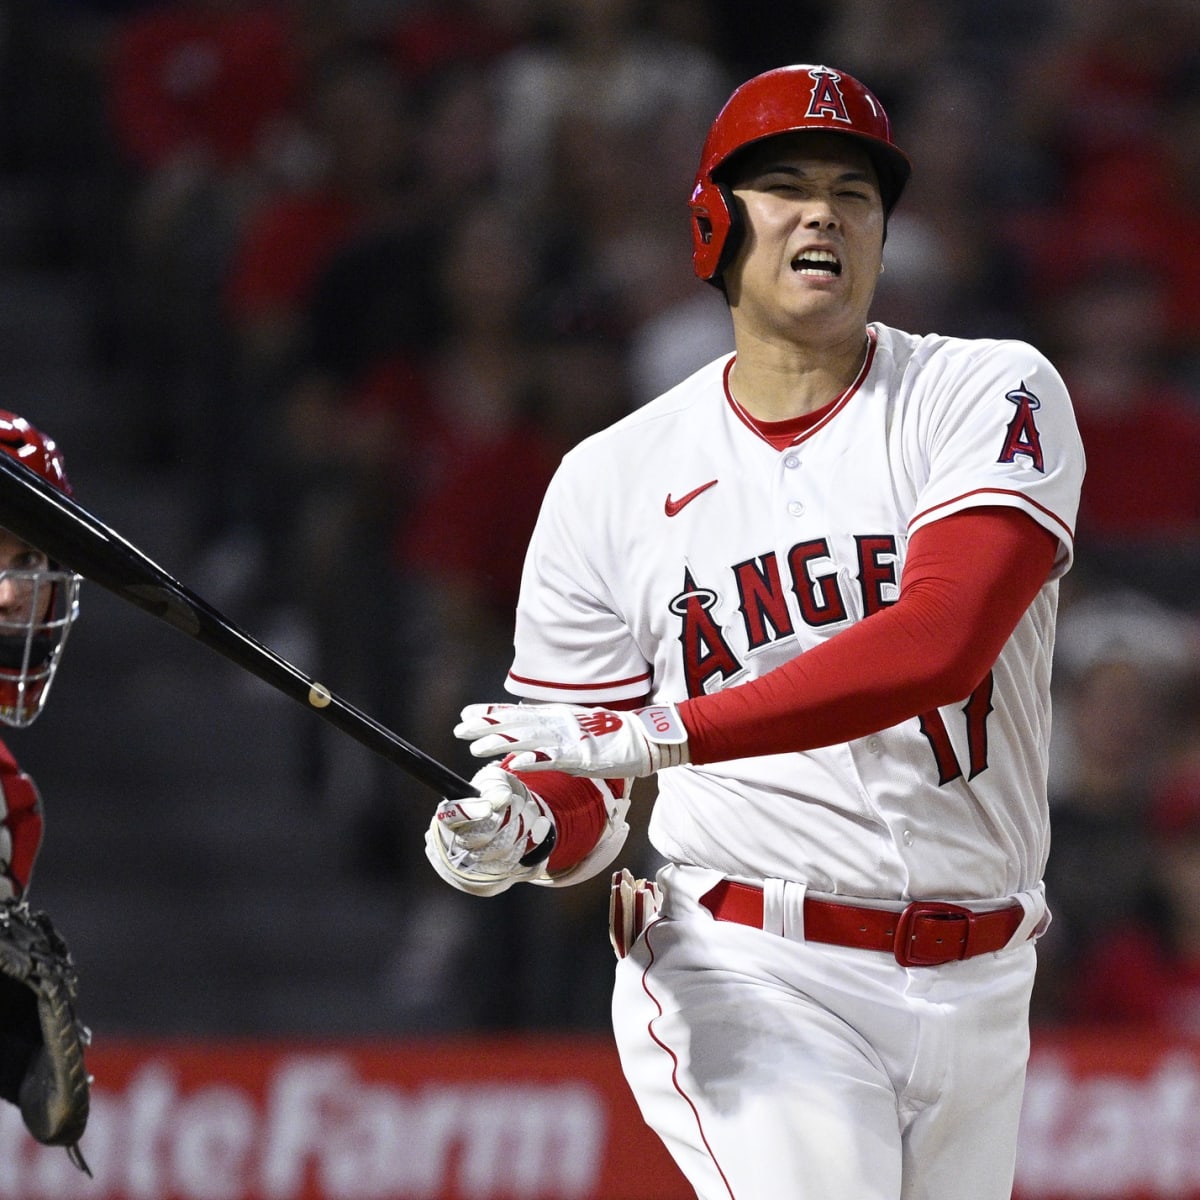 Shohei Ohtani expected to still DH for Angels after UCL tear